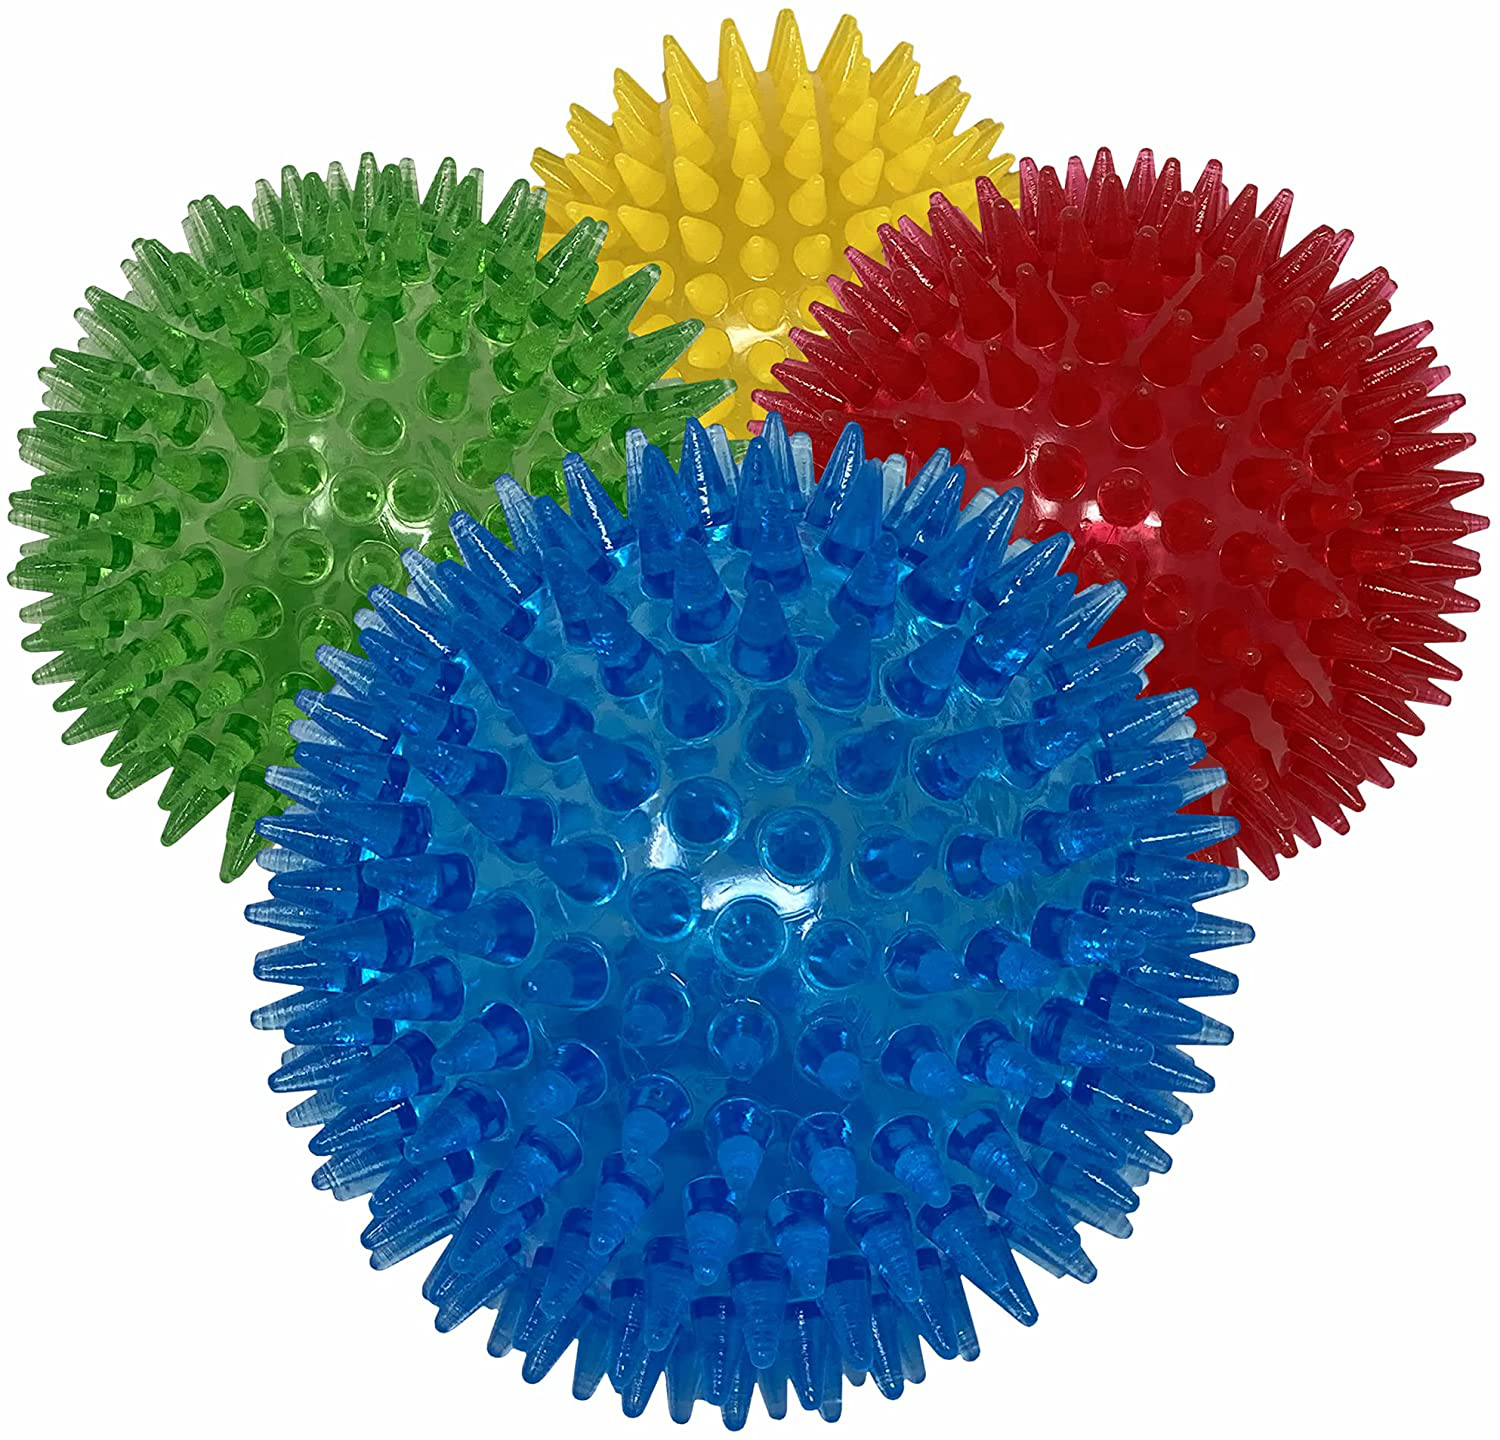 Dipperdap 4-Pack Squeaky Dog Toys 3.5” Spikey Dog Balls | Cleans Teeth for Healthier Gums |Non-Toxic Bpa-Free Dog Toys for Aggressive Chewers |Spikey Balls in Red, Blue, Yellow, and Green